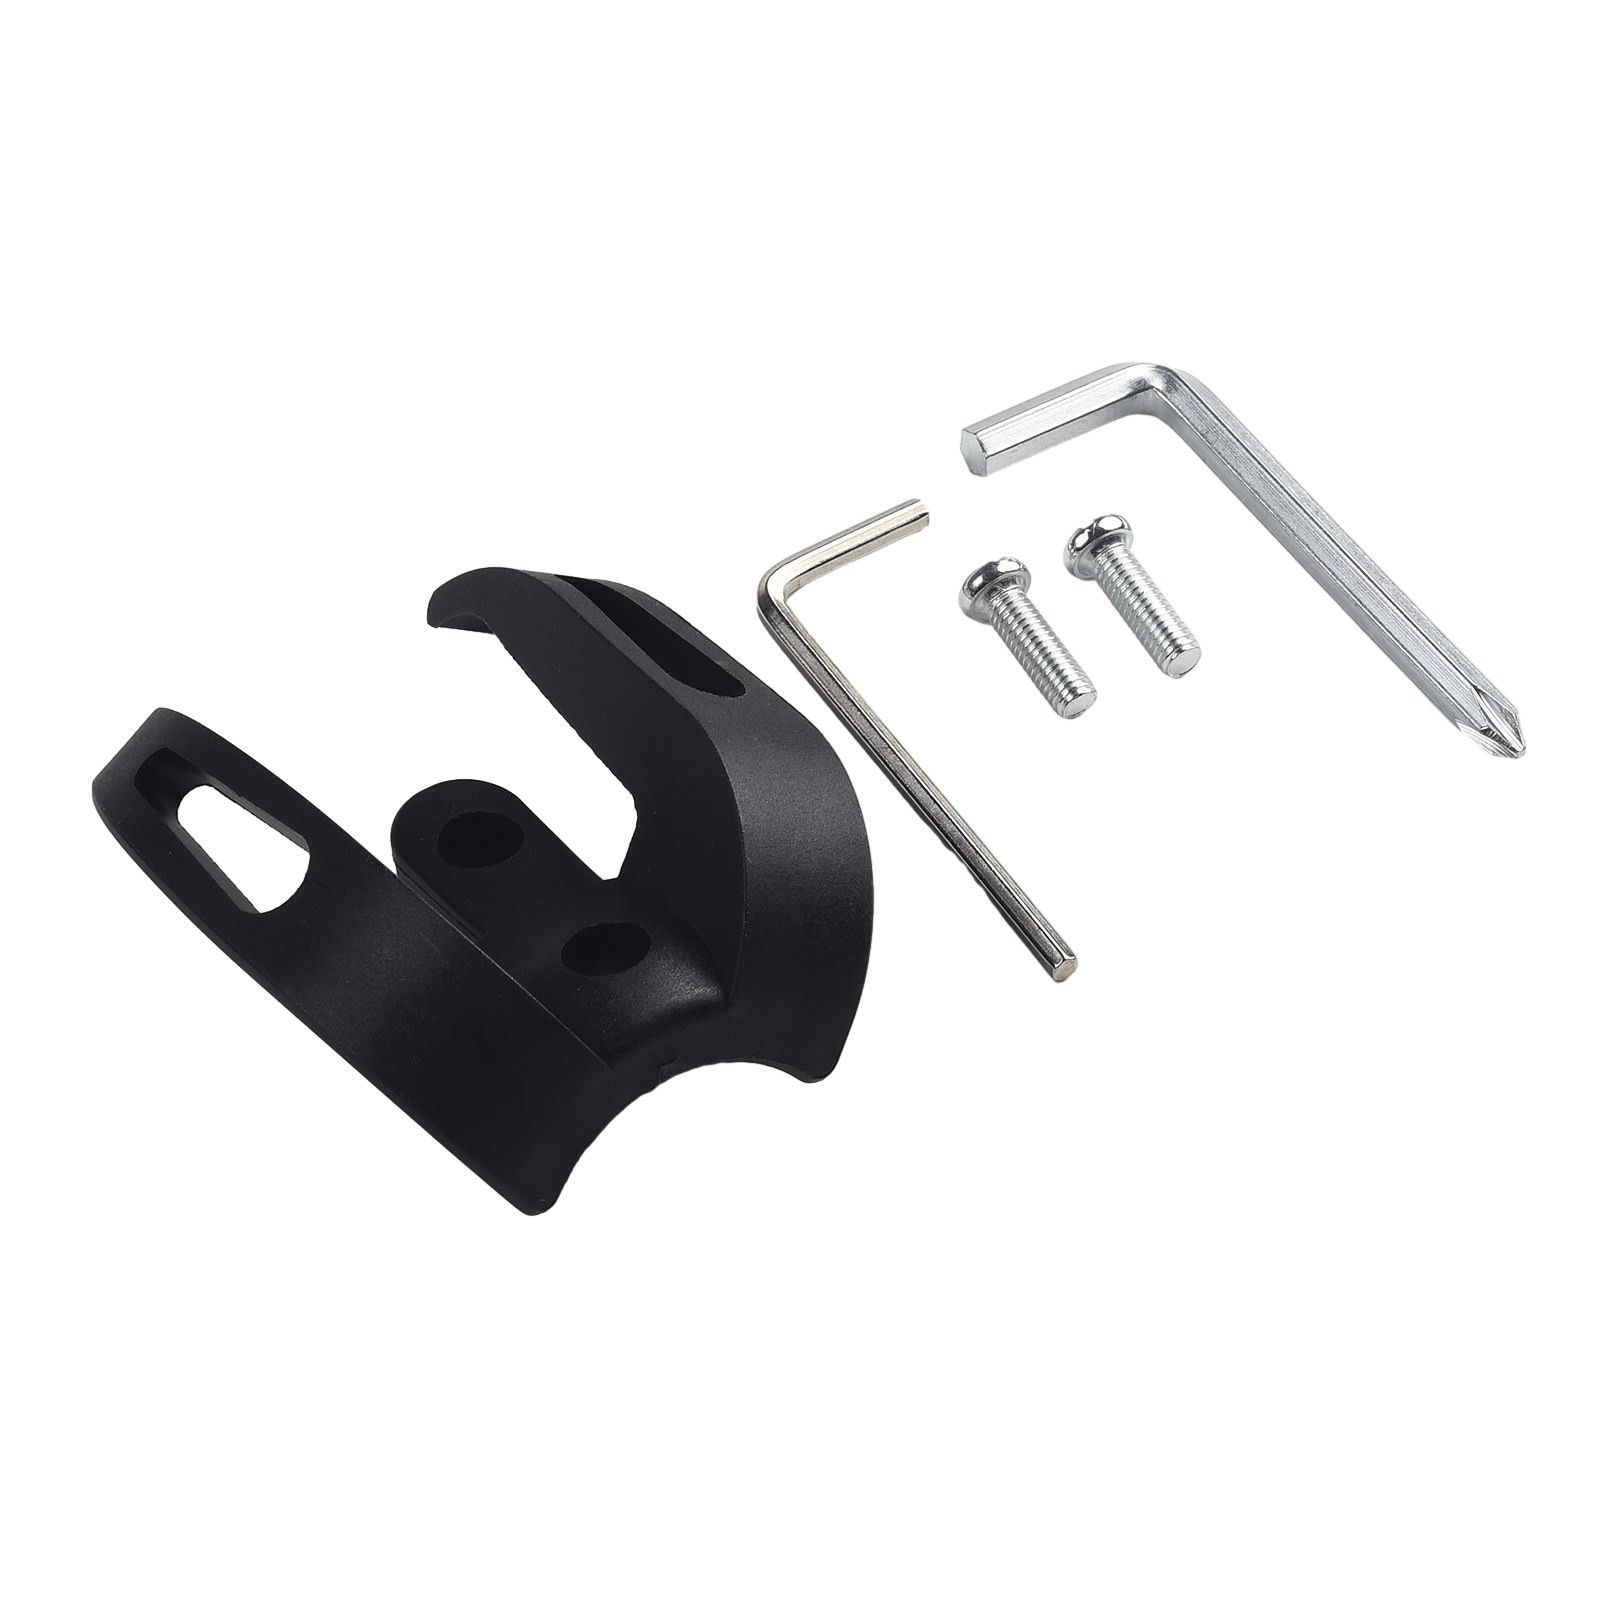 Durable Scooters Hook Tool Kit Material PC Outdoor Part Ride Breplacement